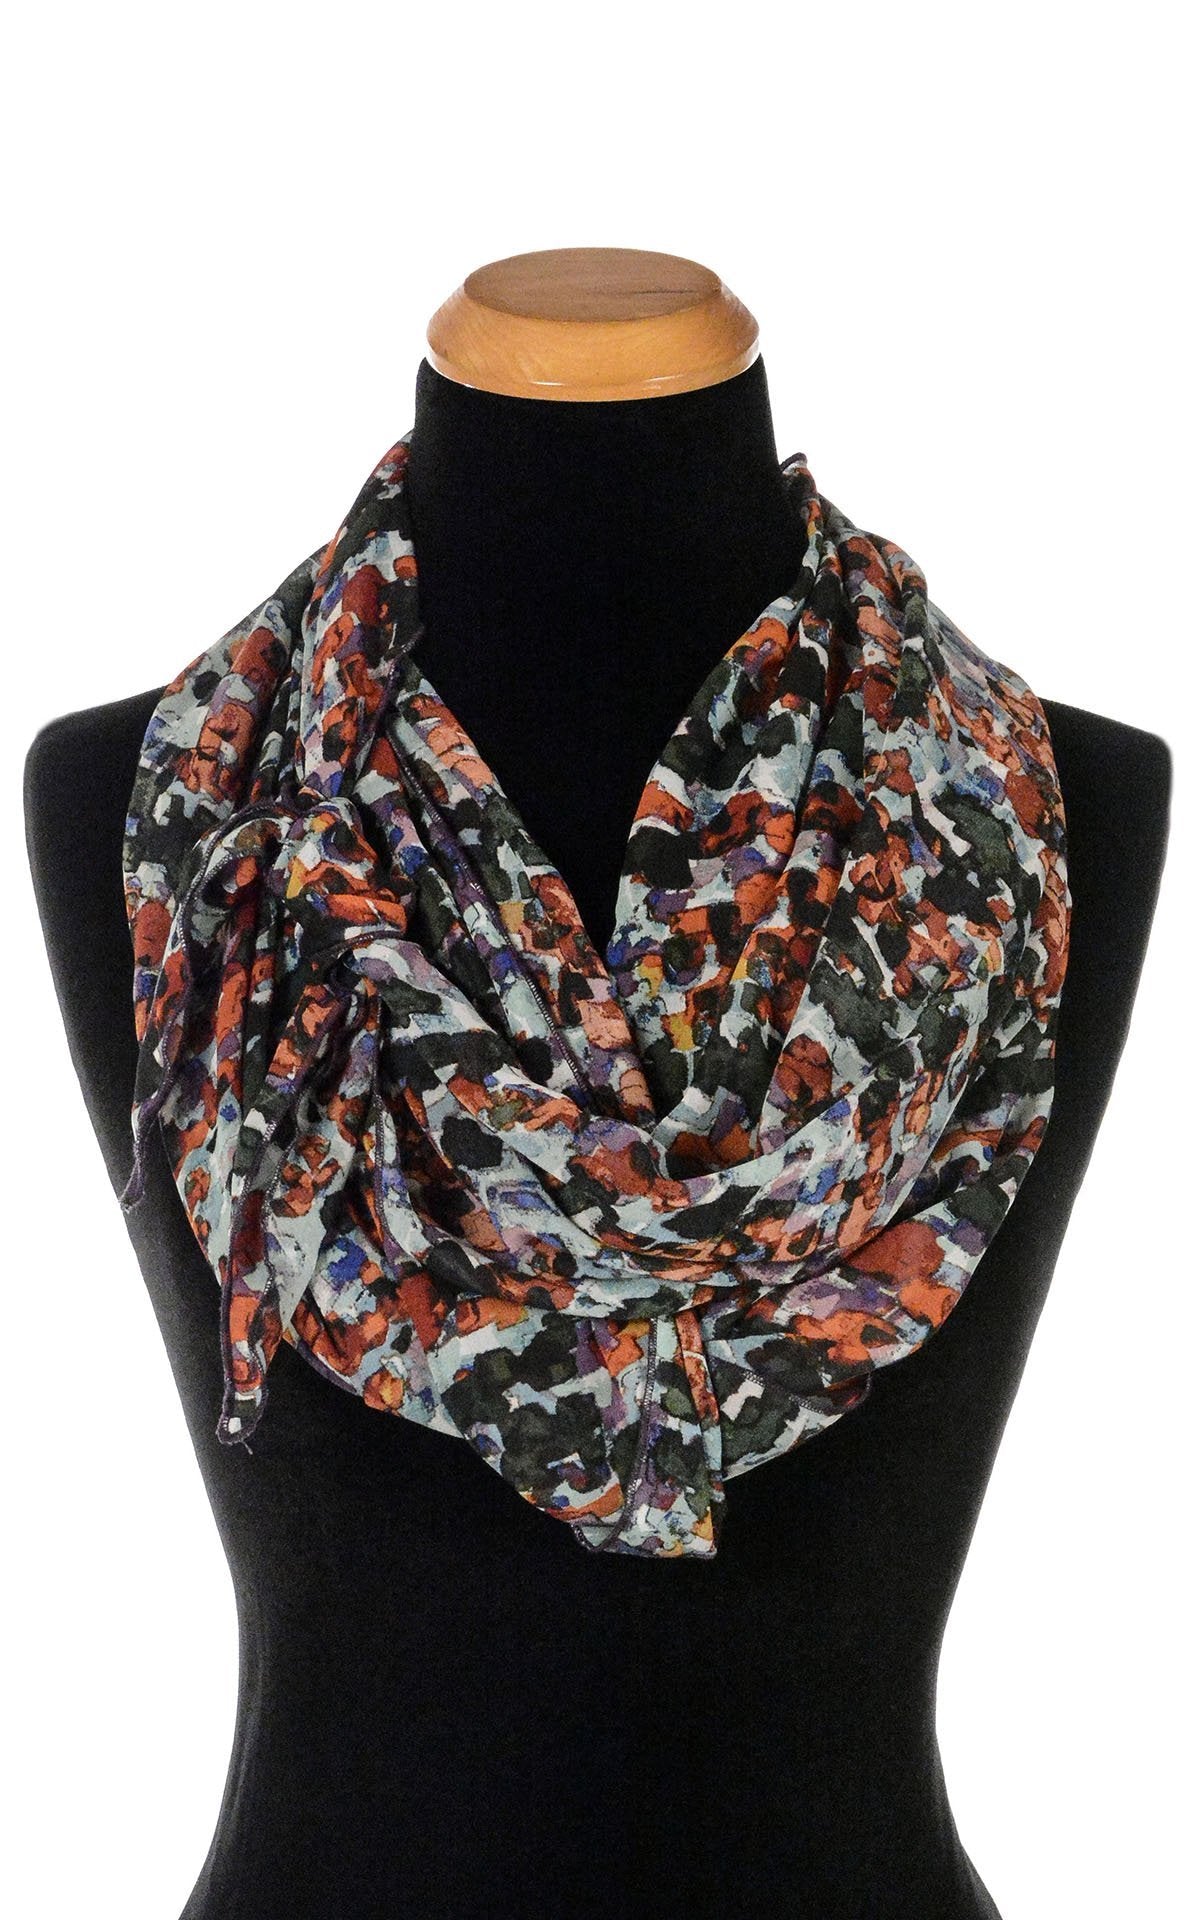 Women’s Large Handkerchief Scarf, Wrap on Mannequin shown tied on side | Shown in Purple Impression abstract Chiffon print. Blacks, reds creams, green, rust| Handmade in Seattle WA | Pandemonium Millinery